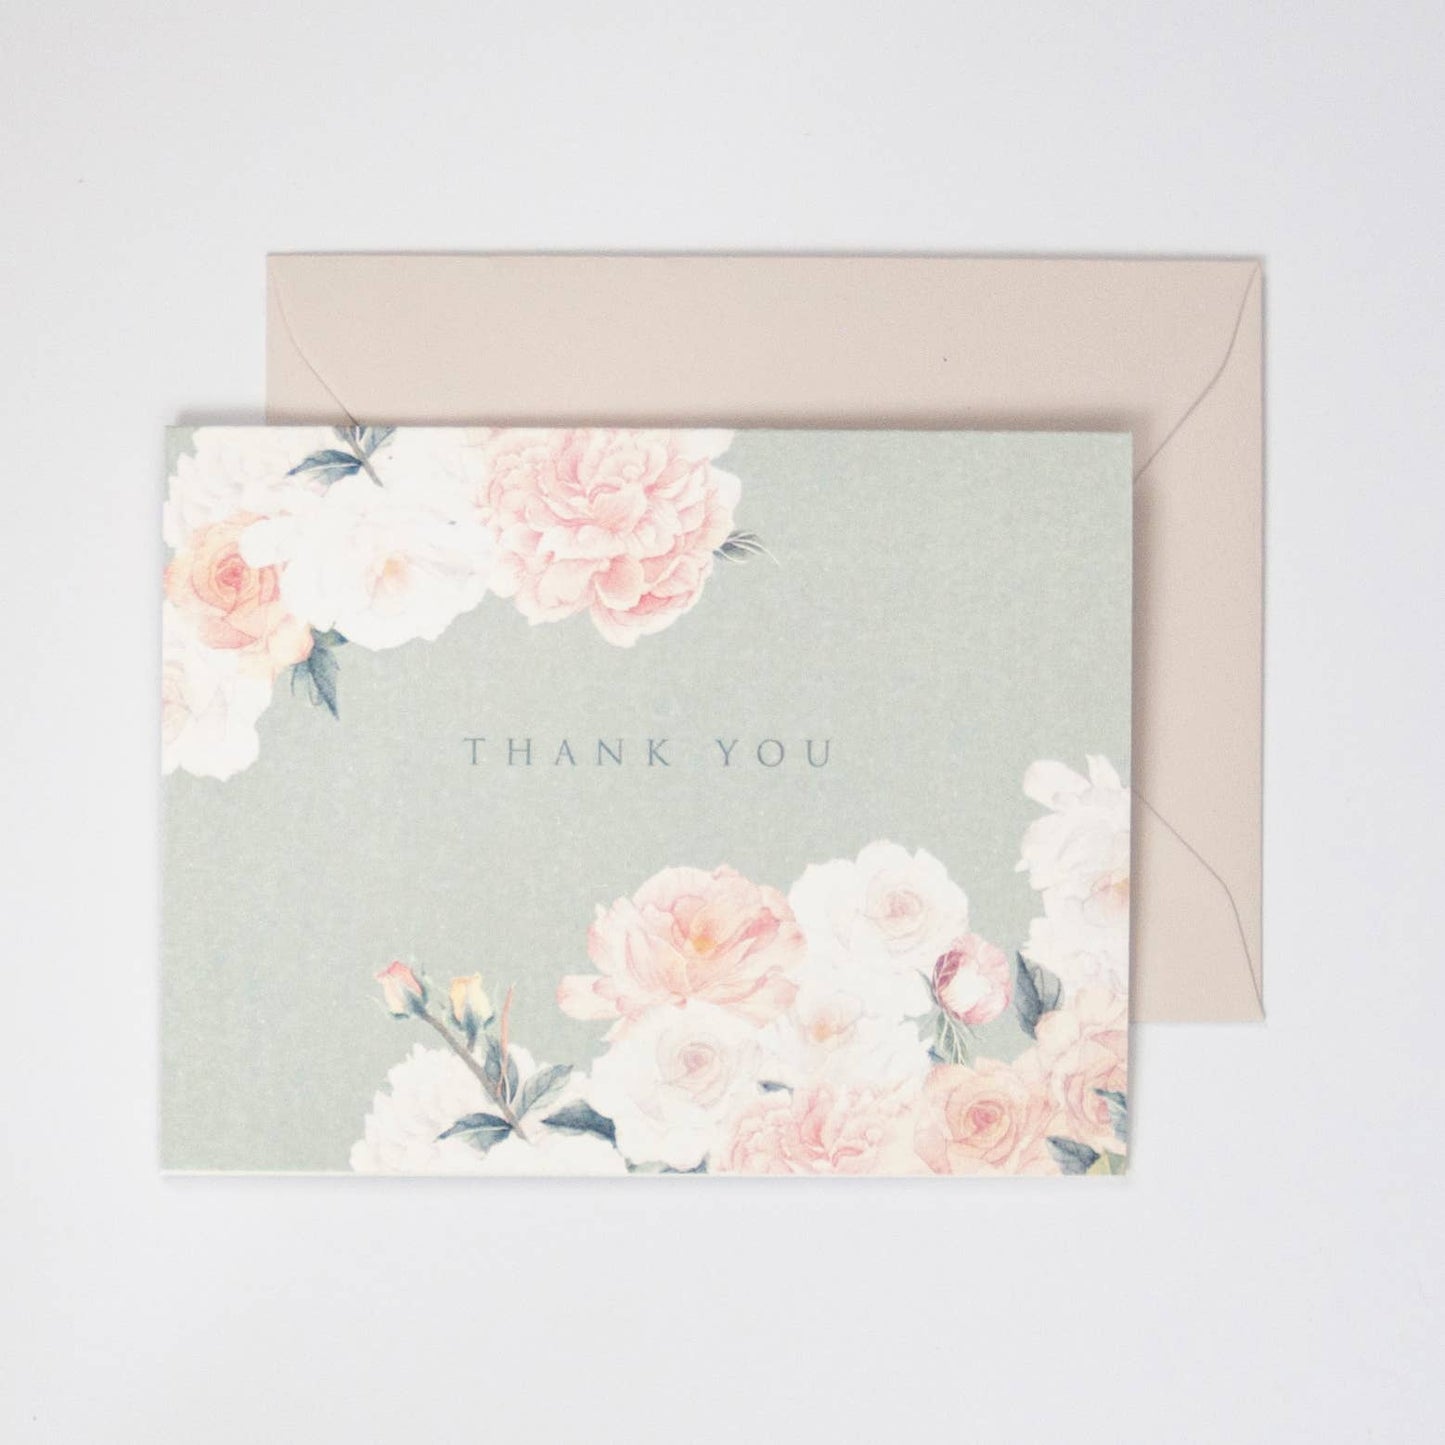 Watercolor Box of Thank You Cards